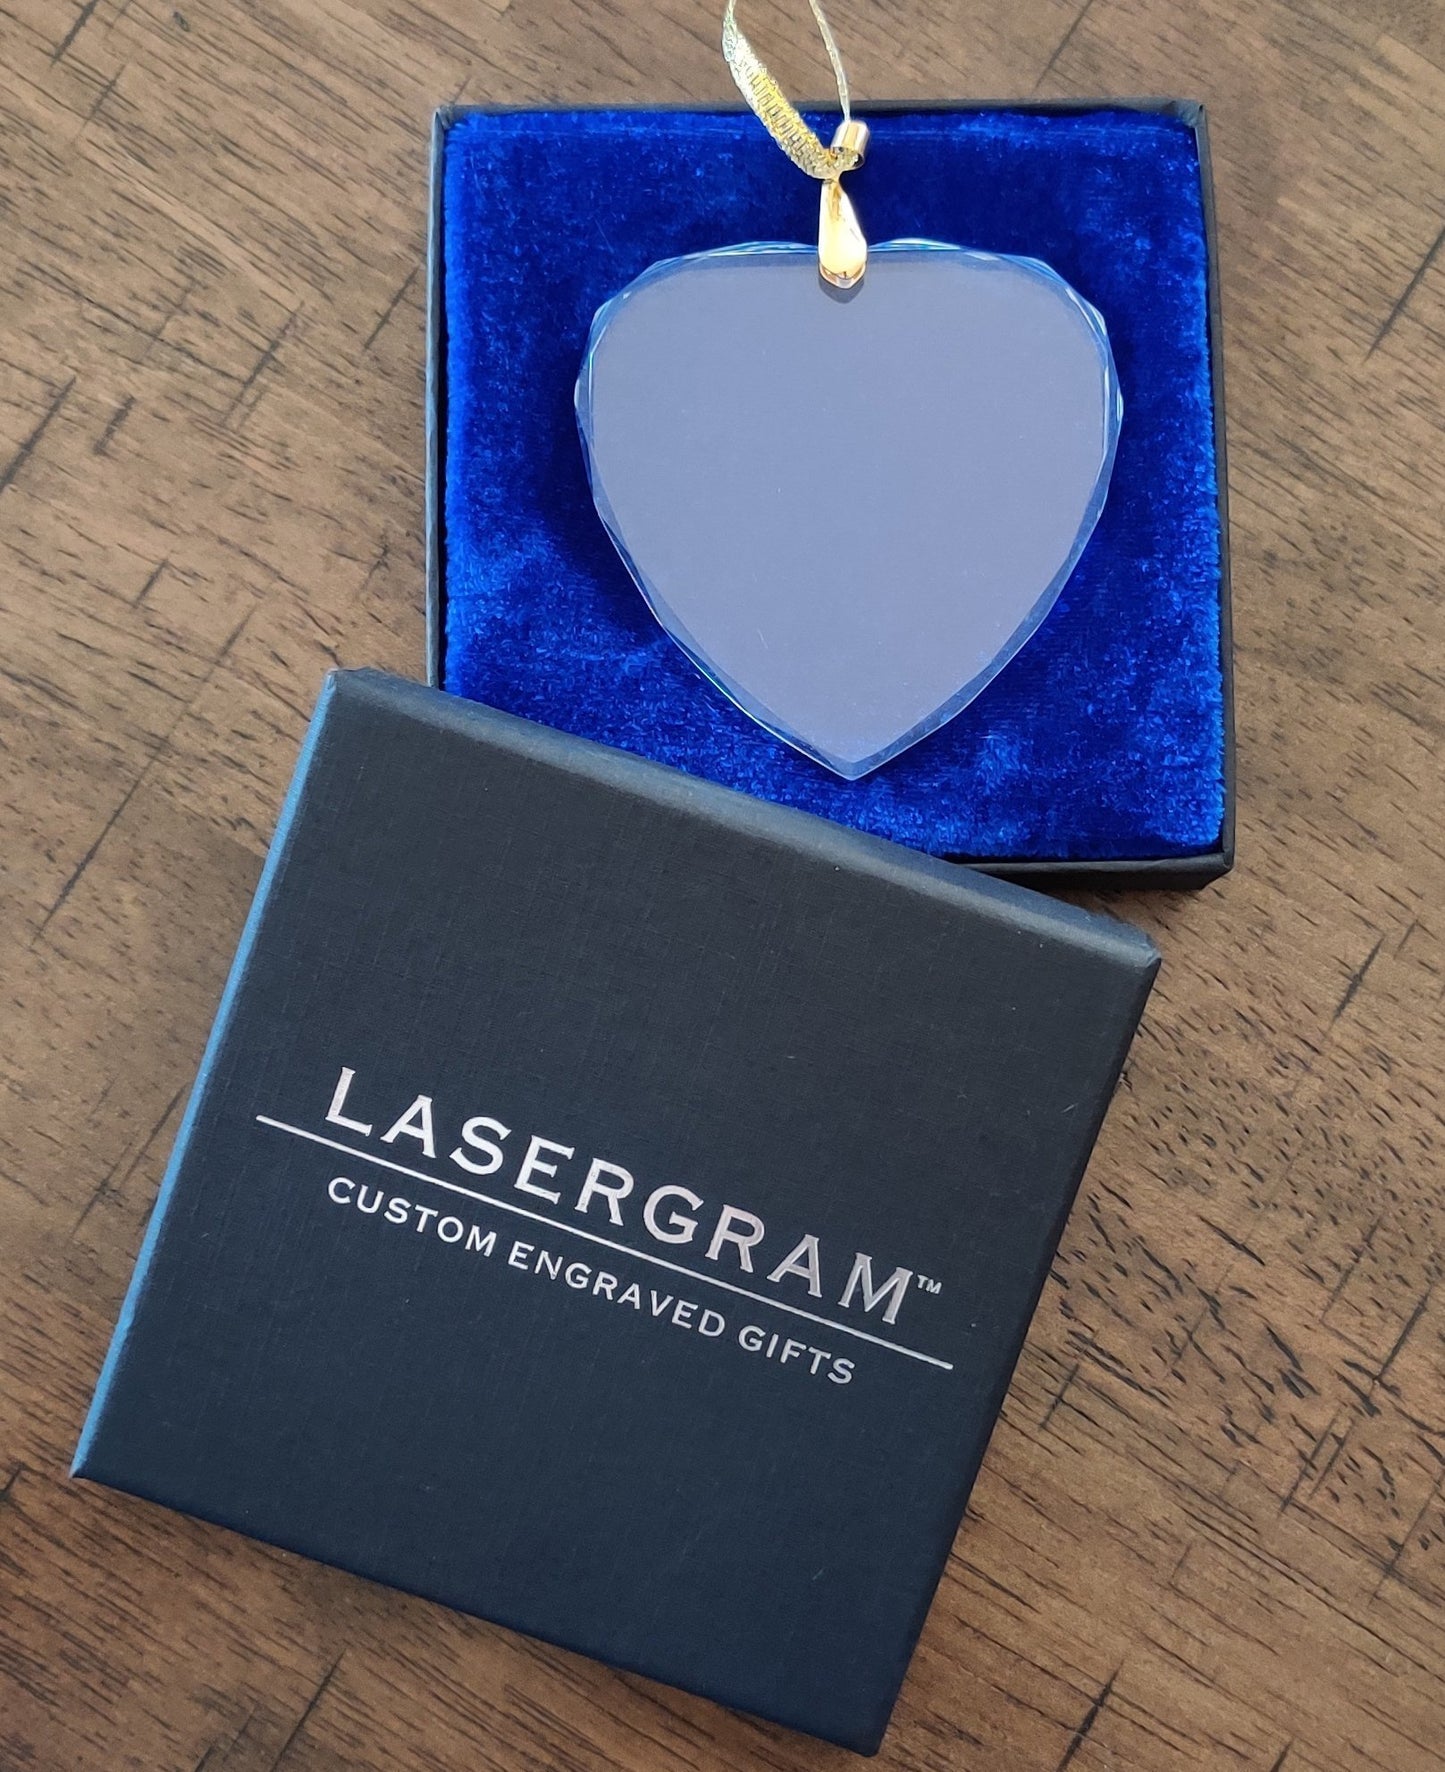 LaserGram Christmas Ornament, World's Greatest Grandma, Personalized Engraving Included (Heart Shape)